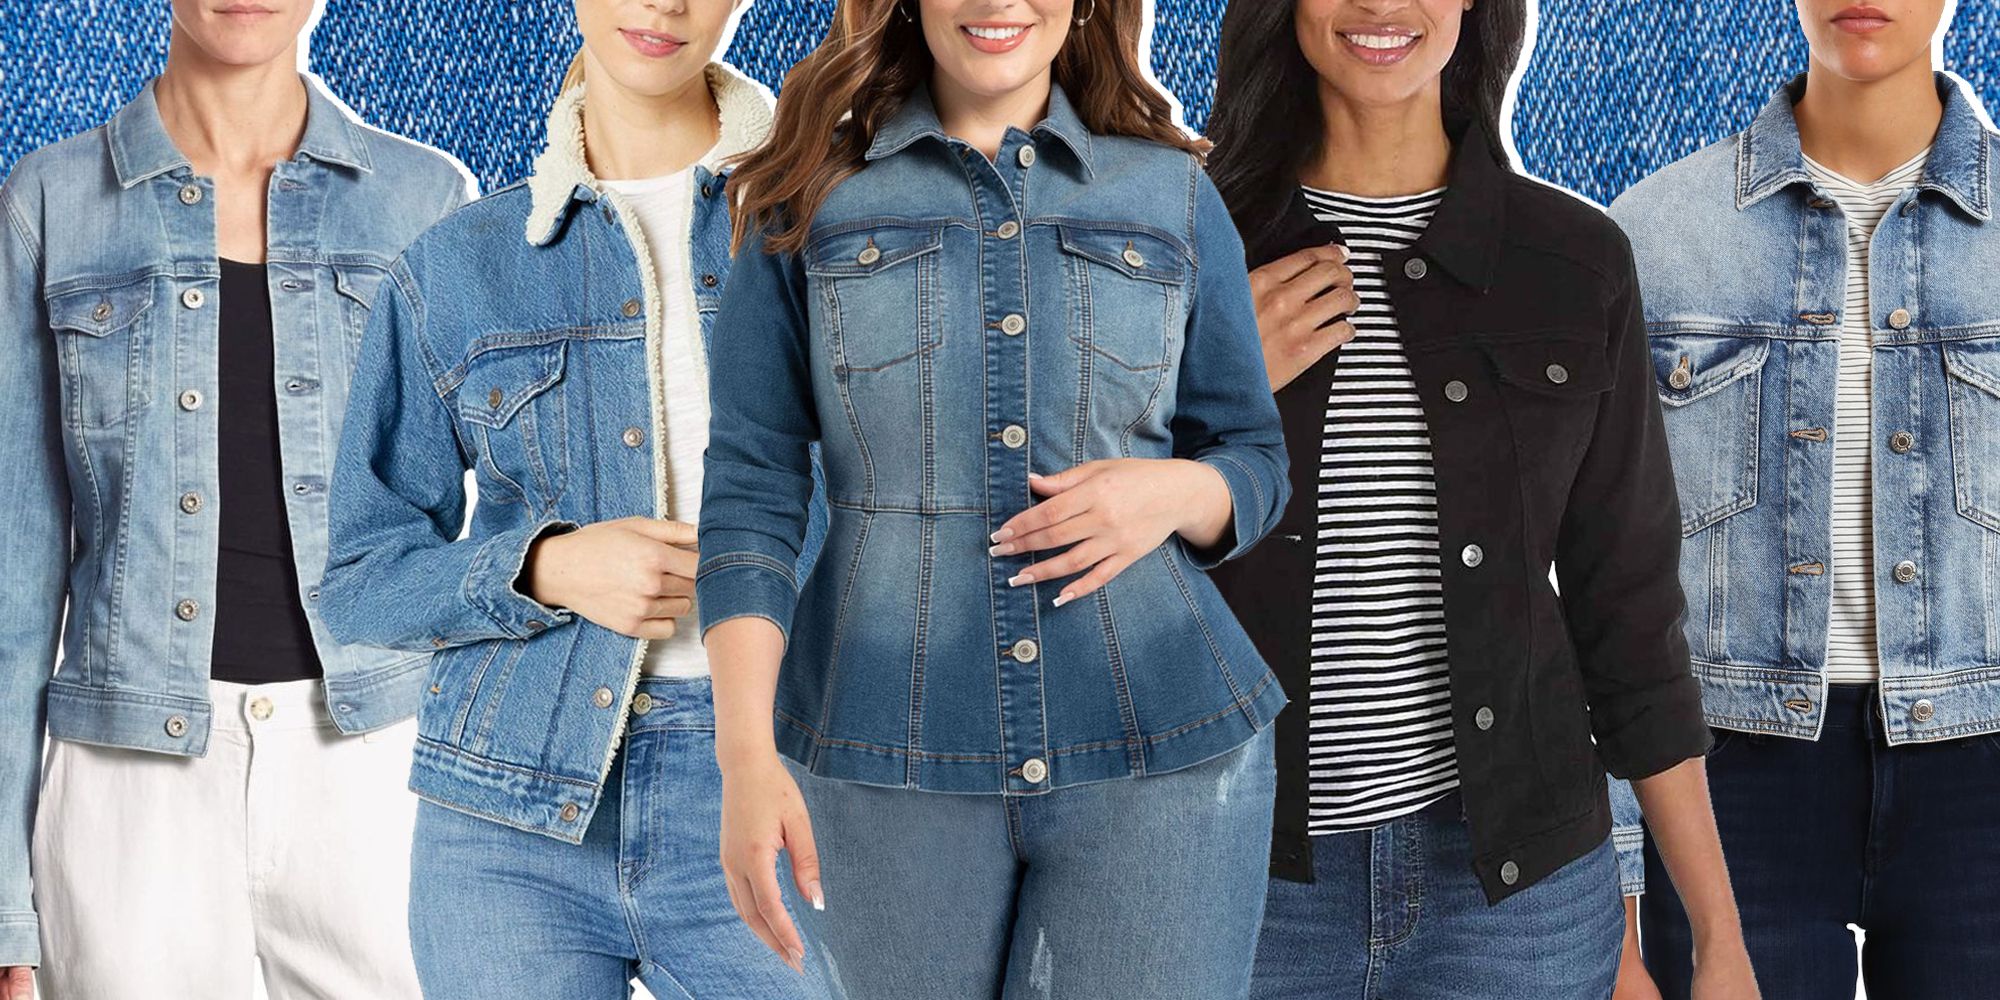 4 Elegant Ways on How to Wear and Pair Denim Jackets - Women's Guide